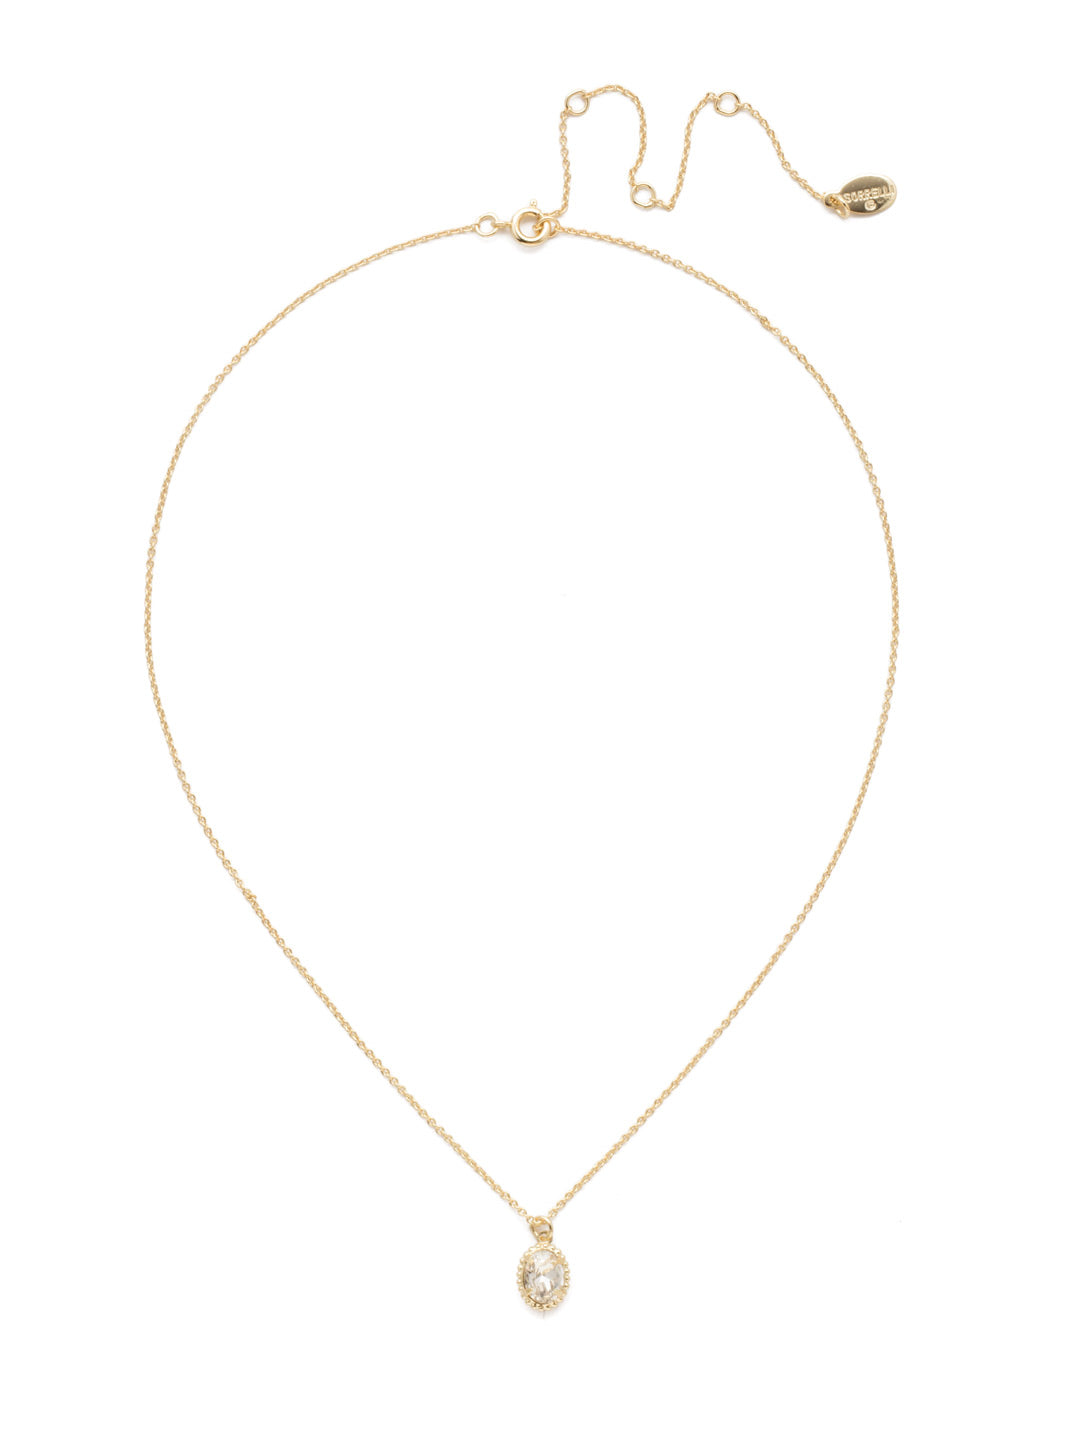 Maisie Pendant Necklace - NEF49BGCRY - <p>This is the perfect day-to-night sparkling tiny pendant necklace that has an adjustable chain to fit your neckline. From Sorrelli's Crystal collection in our Bright Gold-tone finish.</p>